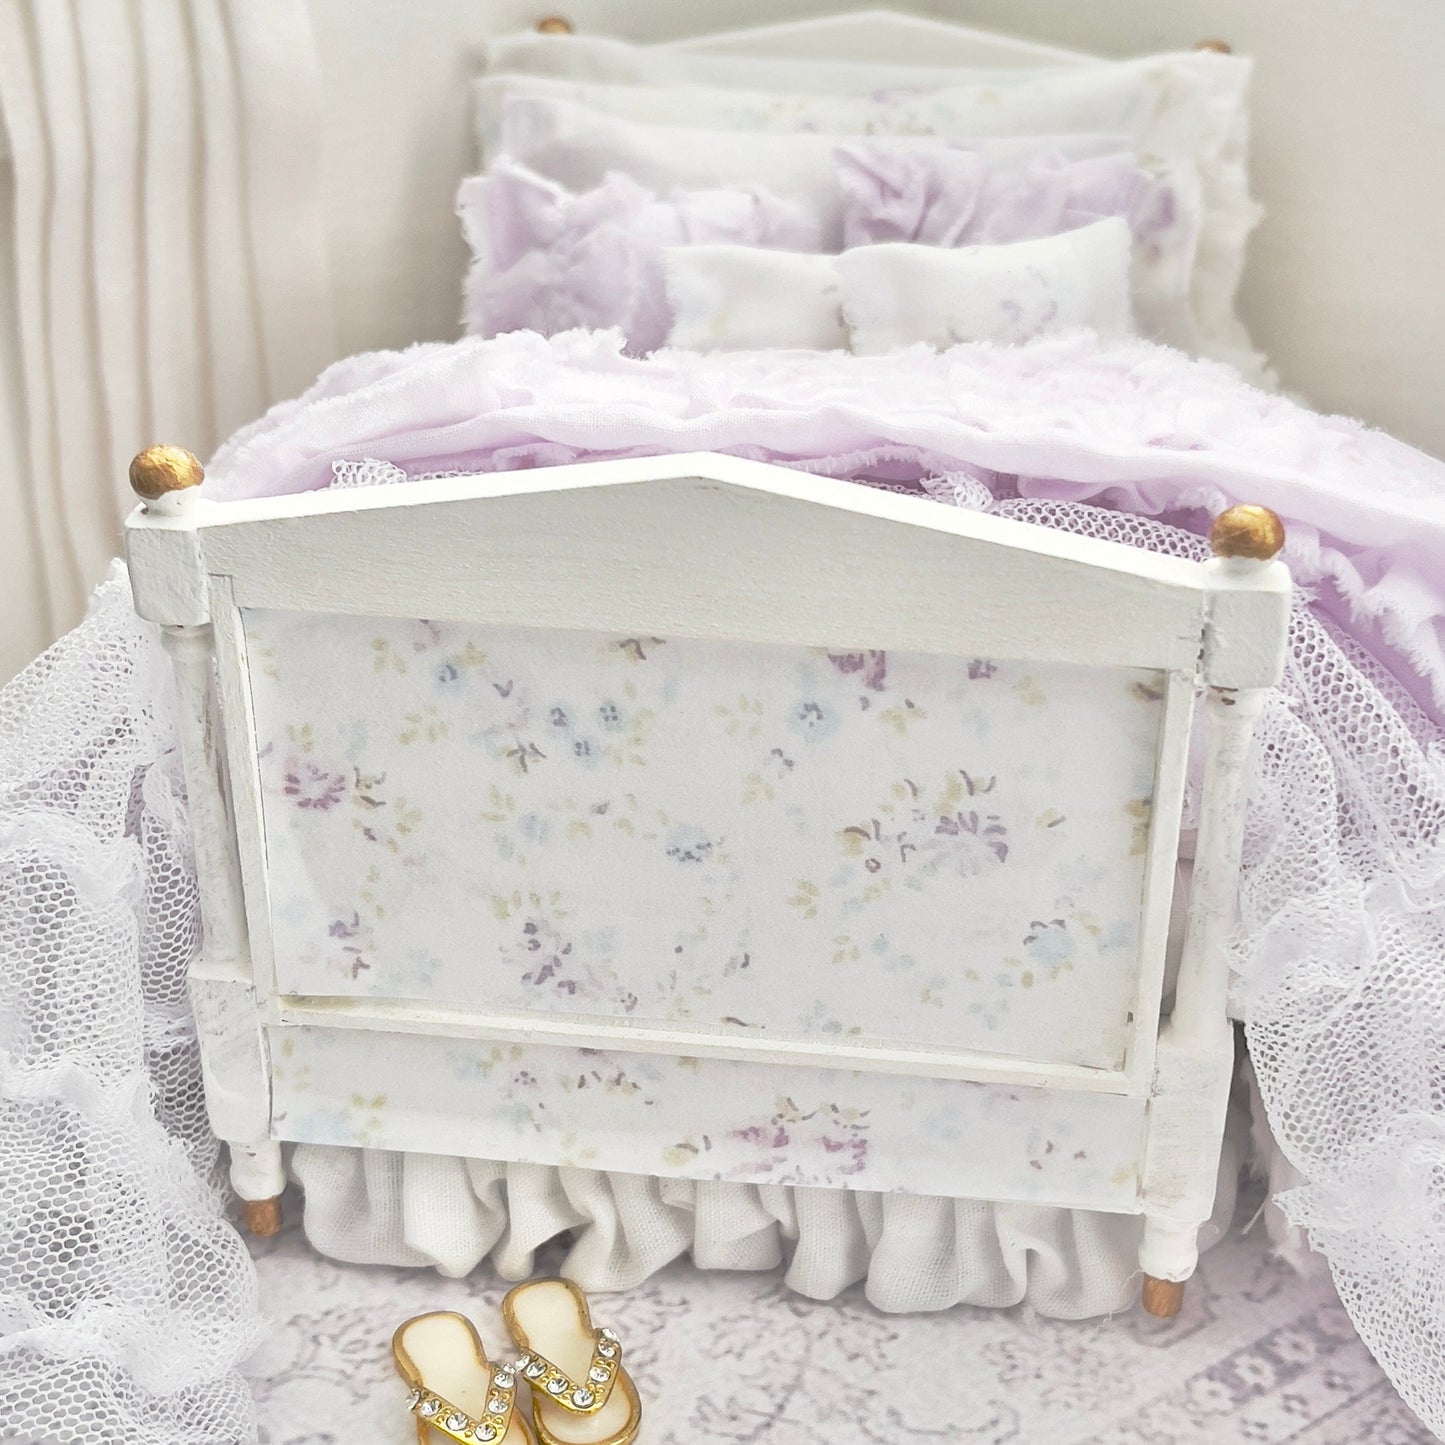 Chantallena Doll House Dressed 1:12 Scale Bed | White Decoupage Bed with Lavender Cotton Bedding Set | Gwynne